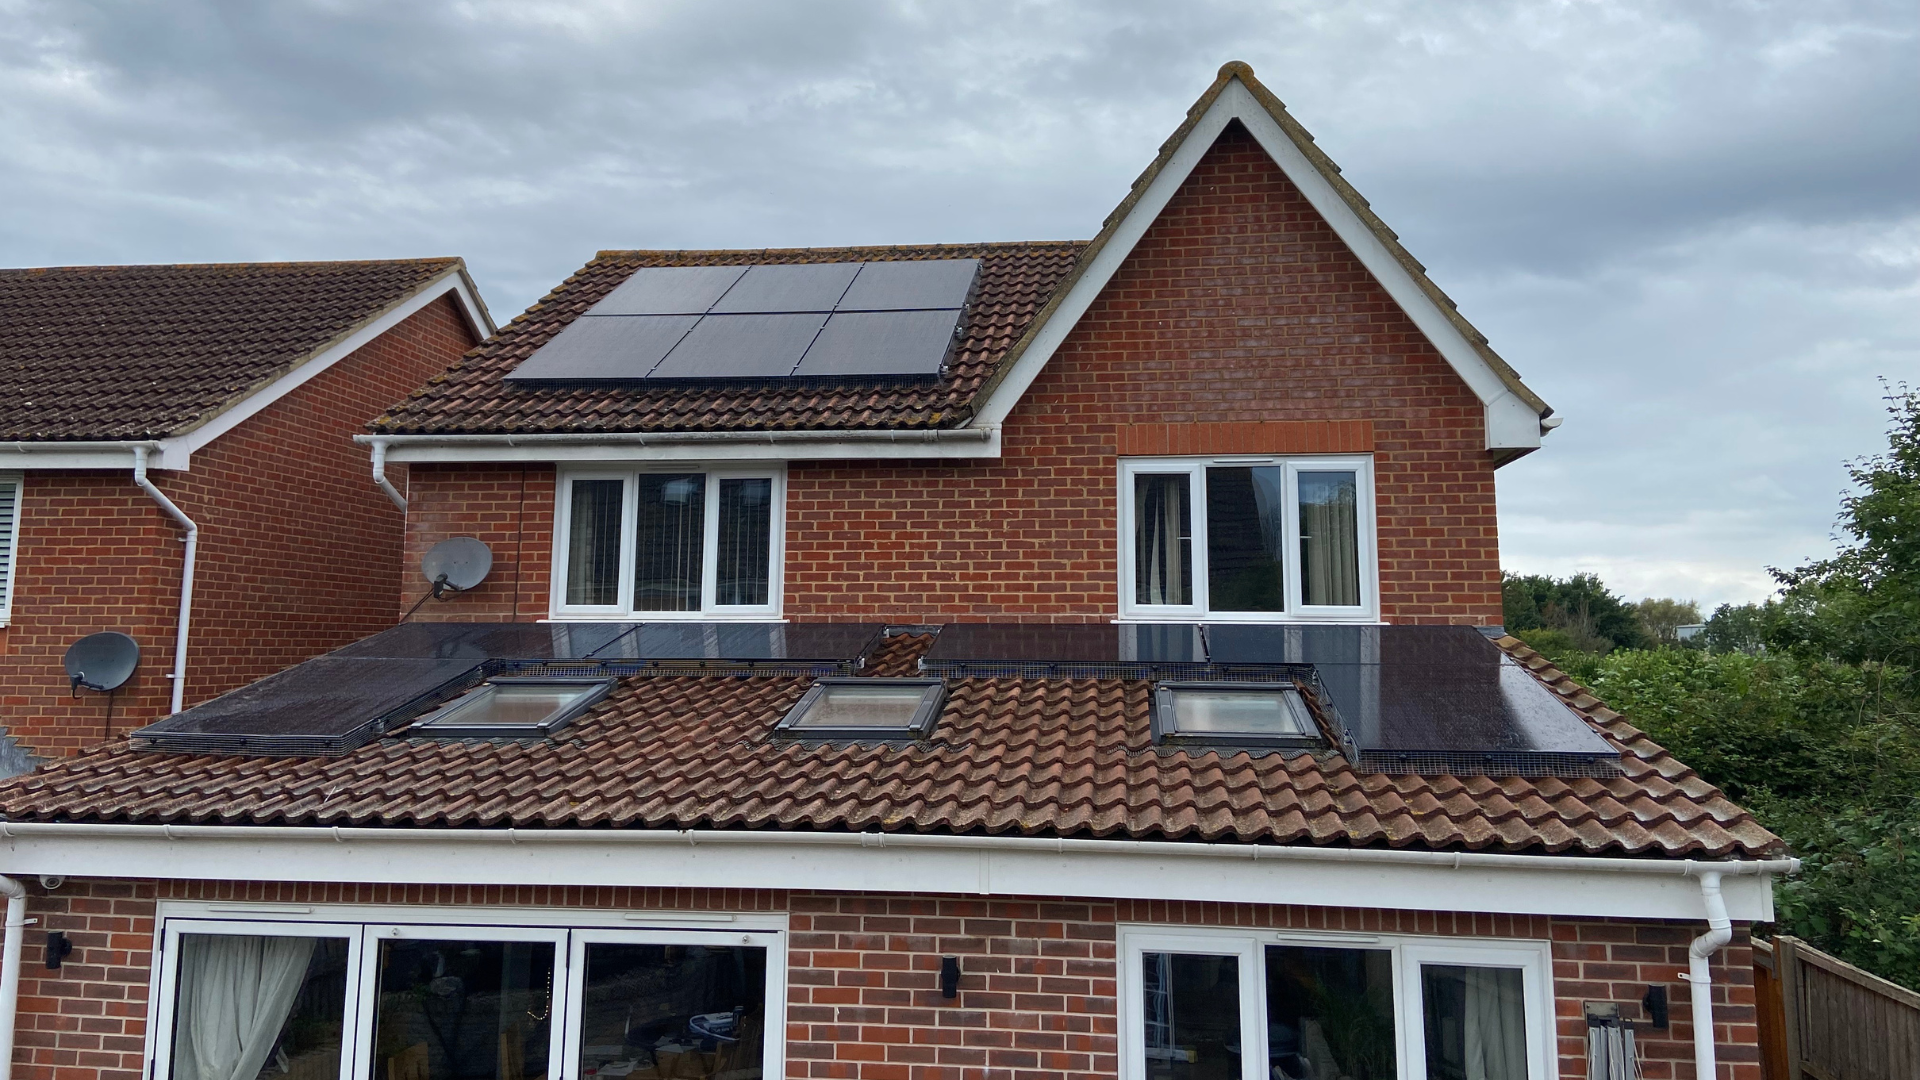 An image of a Solar PV install on a typical domestic property 